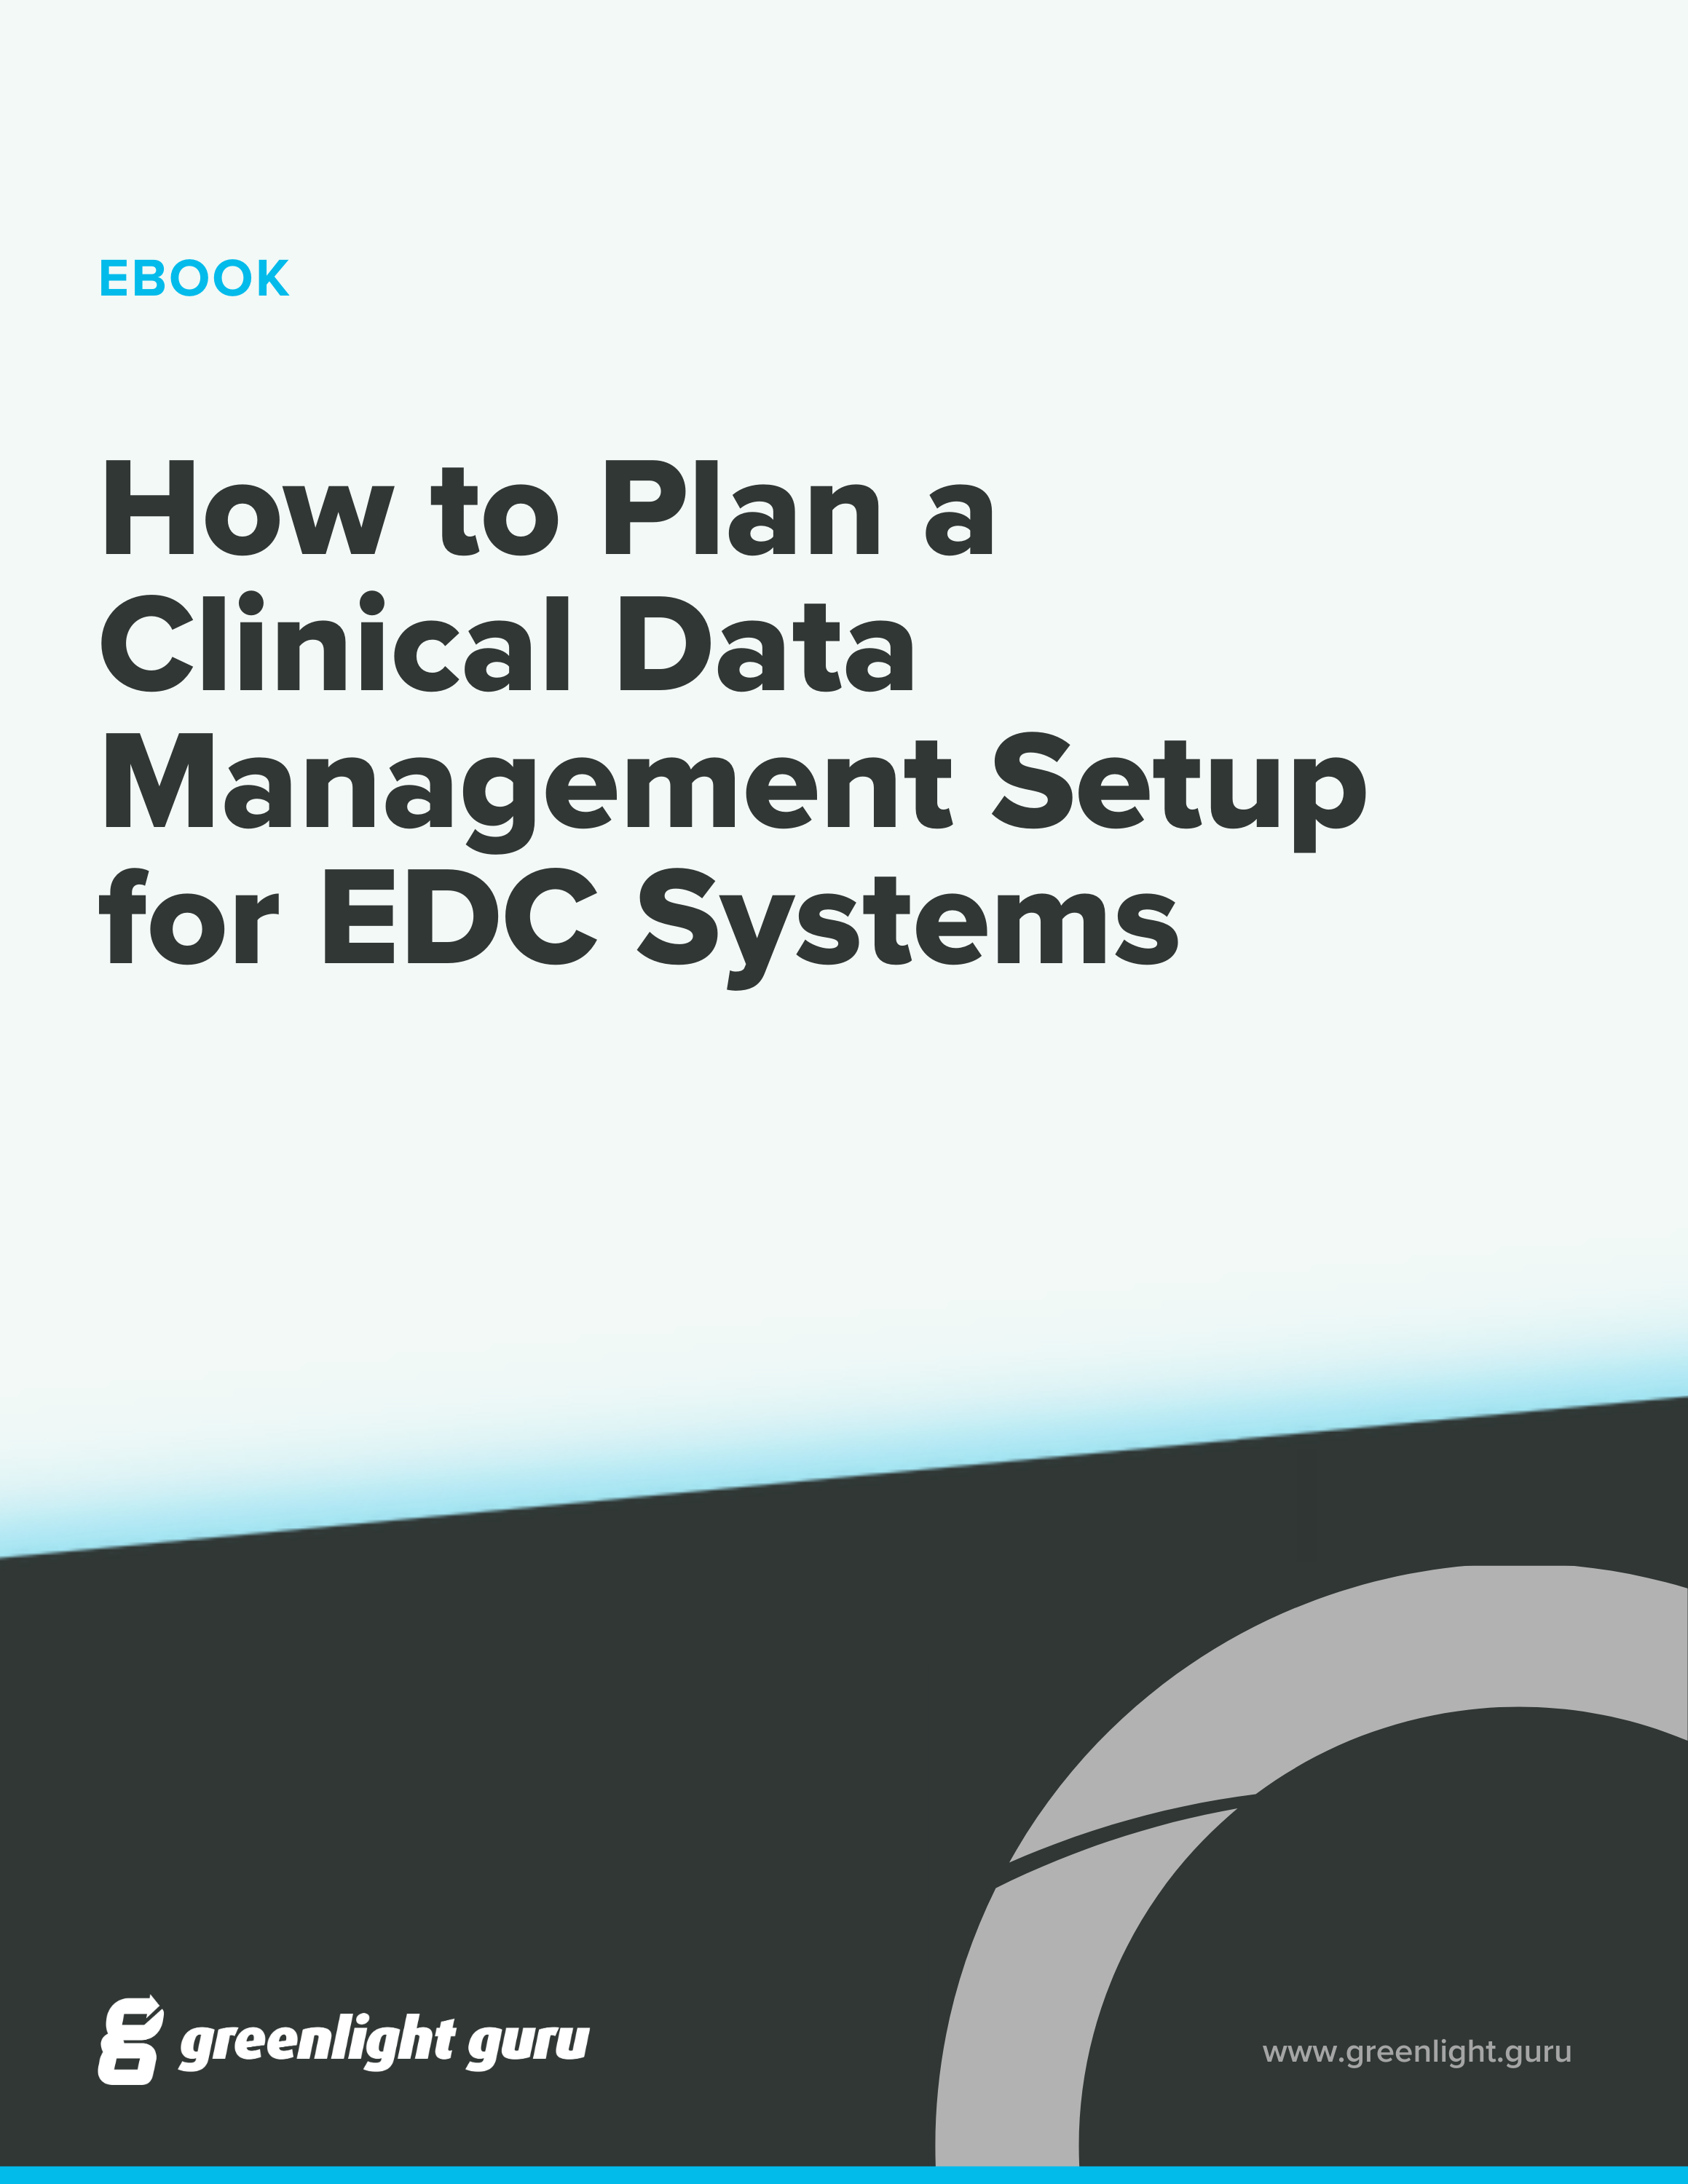 How to Plan a Clinical Data Management Setup for EDC Systems (new)